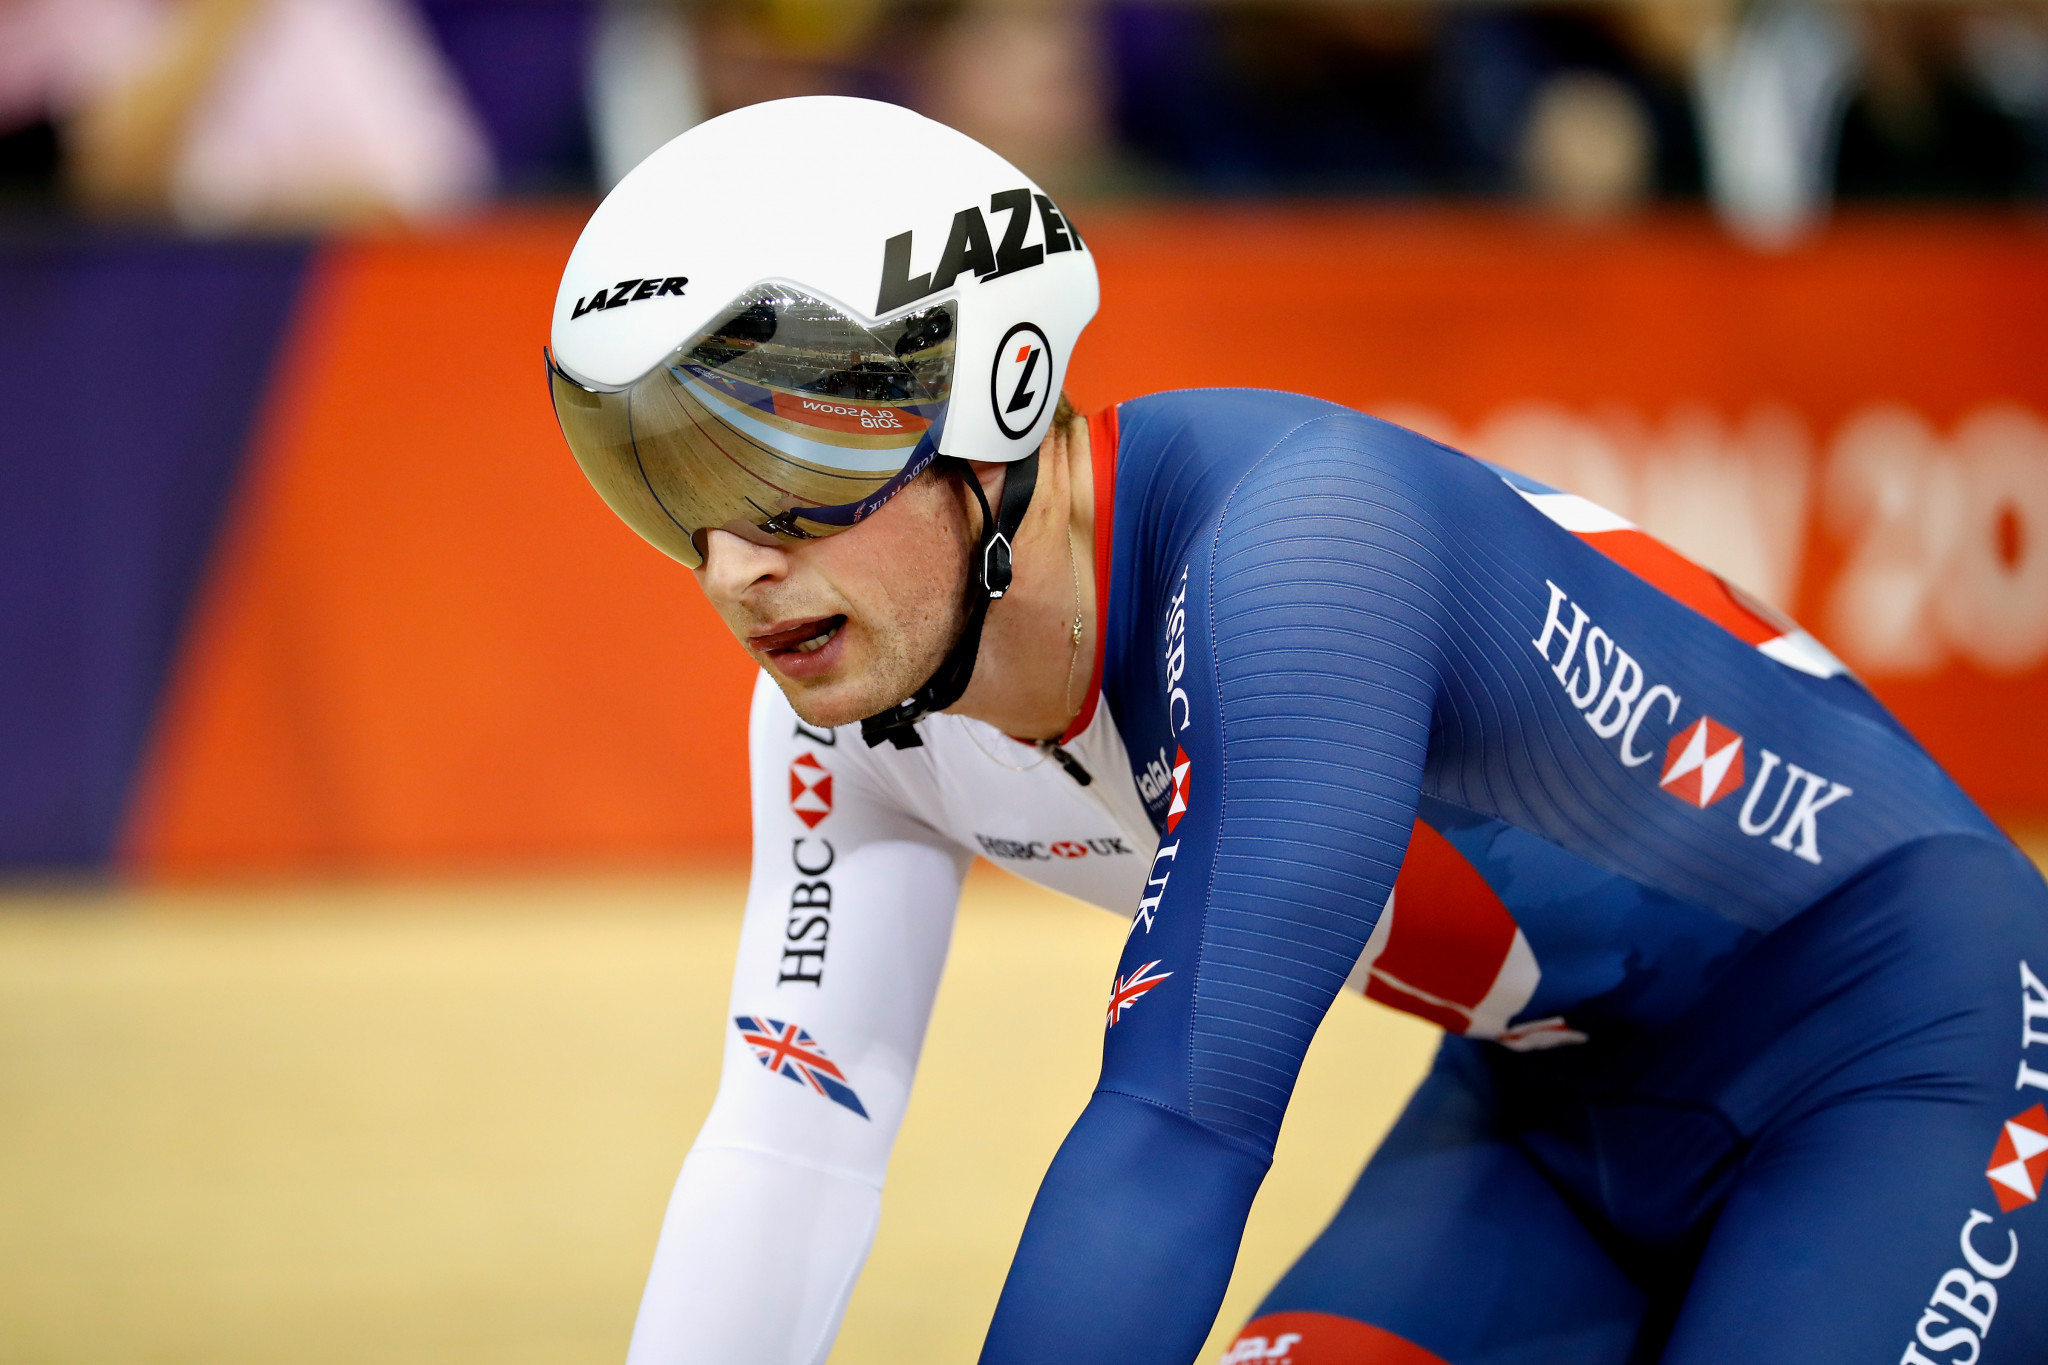 Britain's six-time Olympic gold medallist Jason Kenny has claimed he is relishing competing at London's Velodrome in the UCI World Cup this weekend ©Getty Images